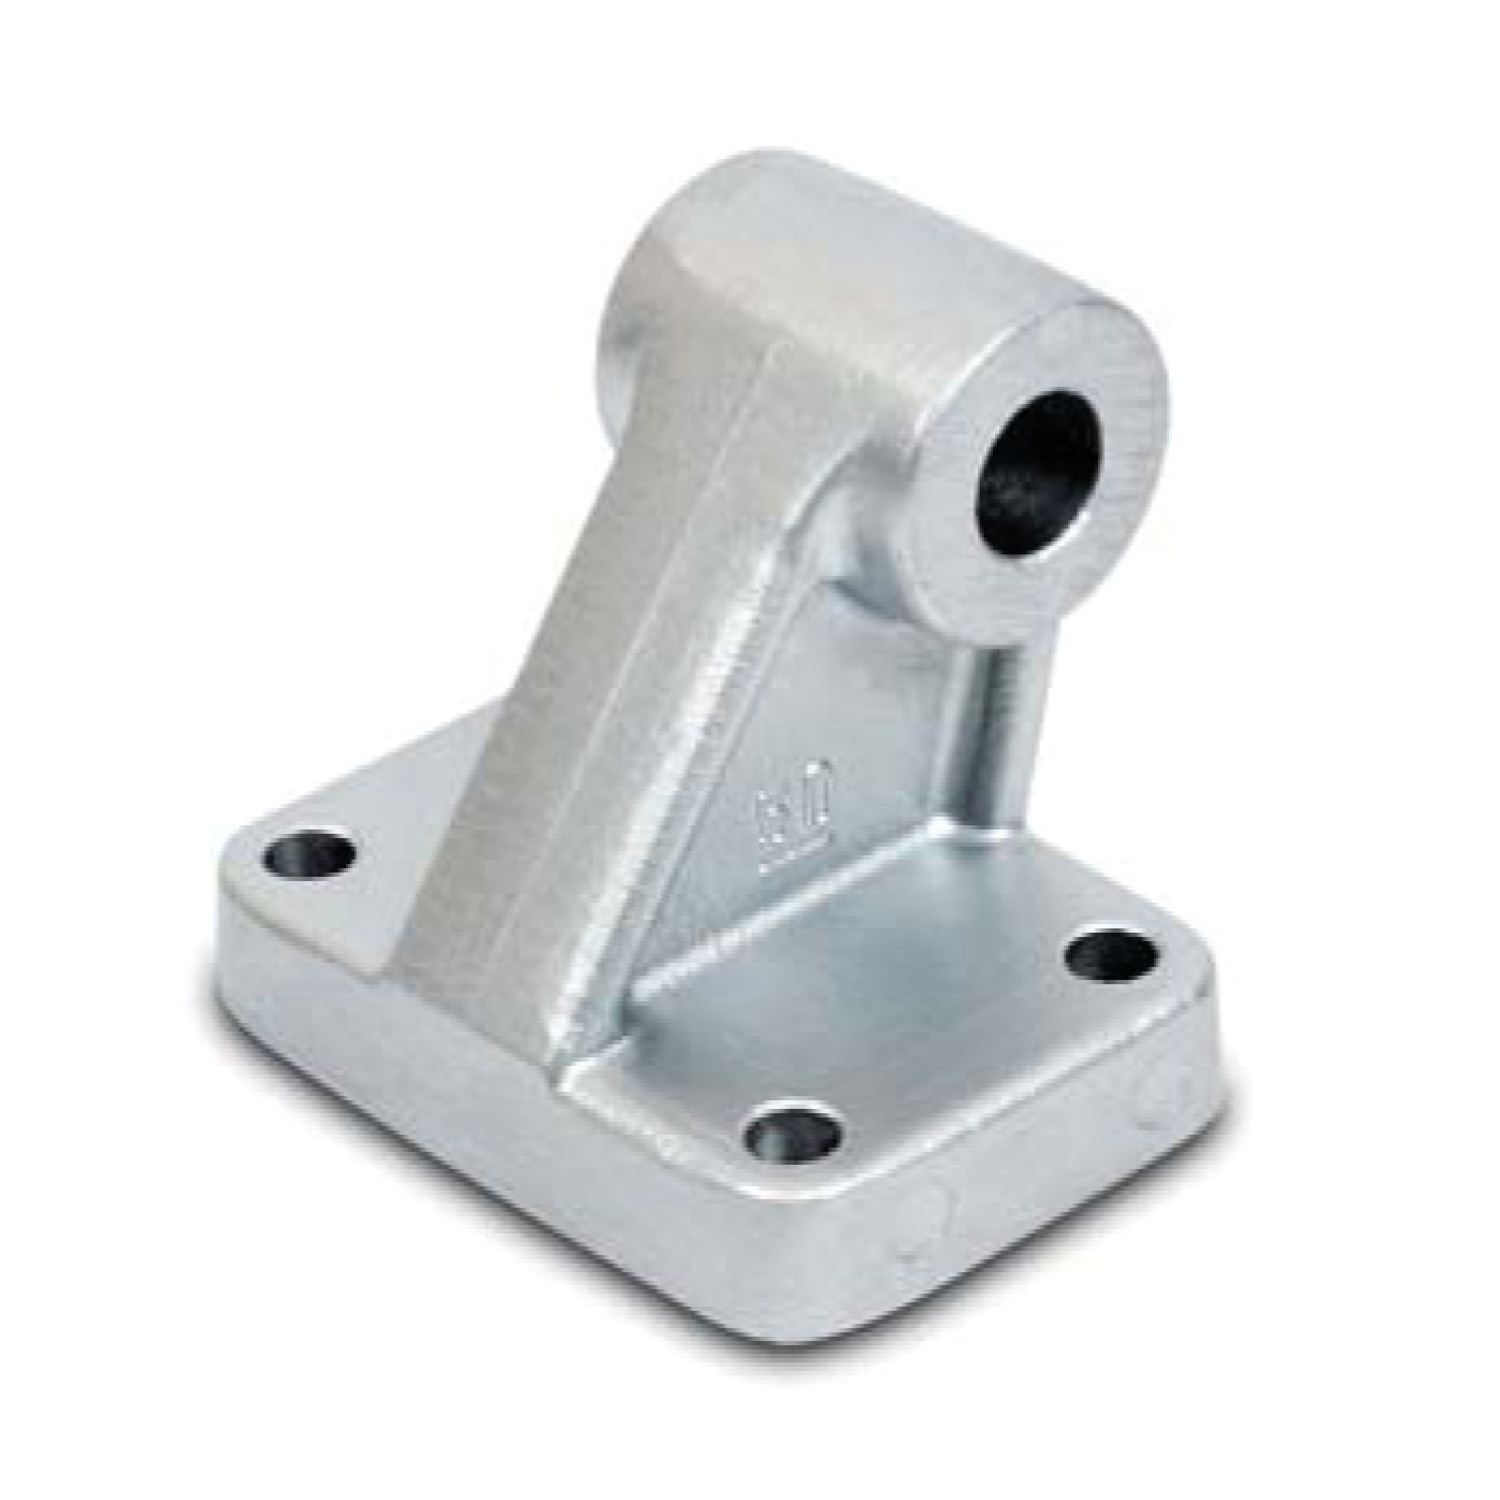 L4812 - Air Cylinder Mounts - CETOP Series